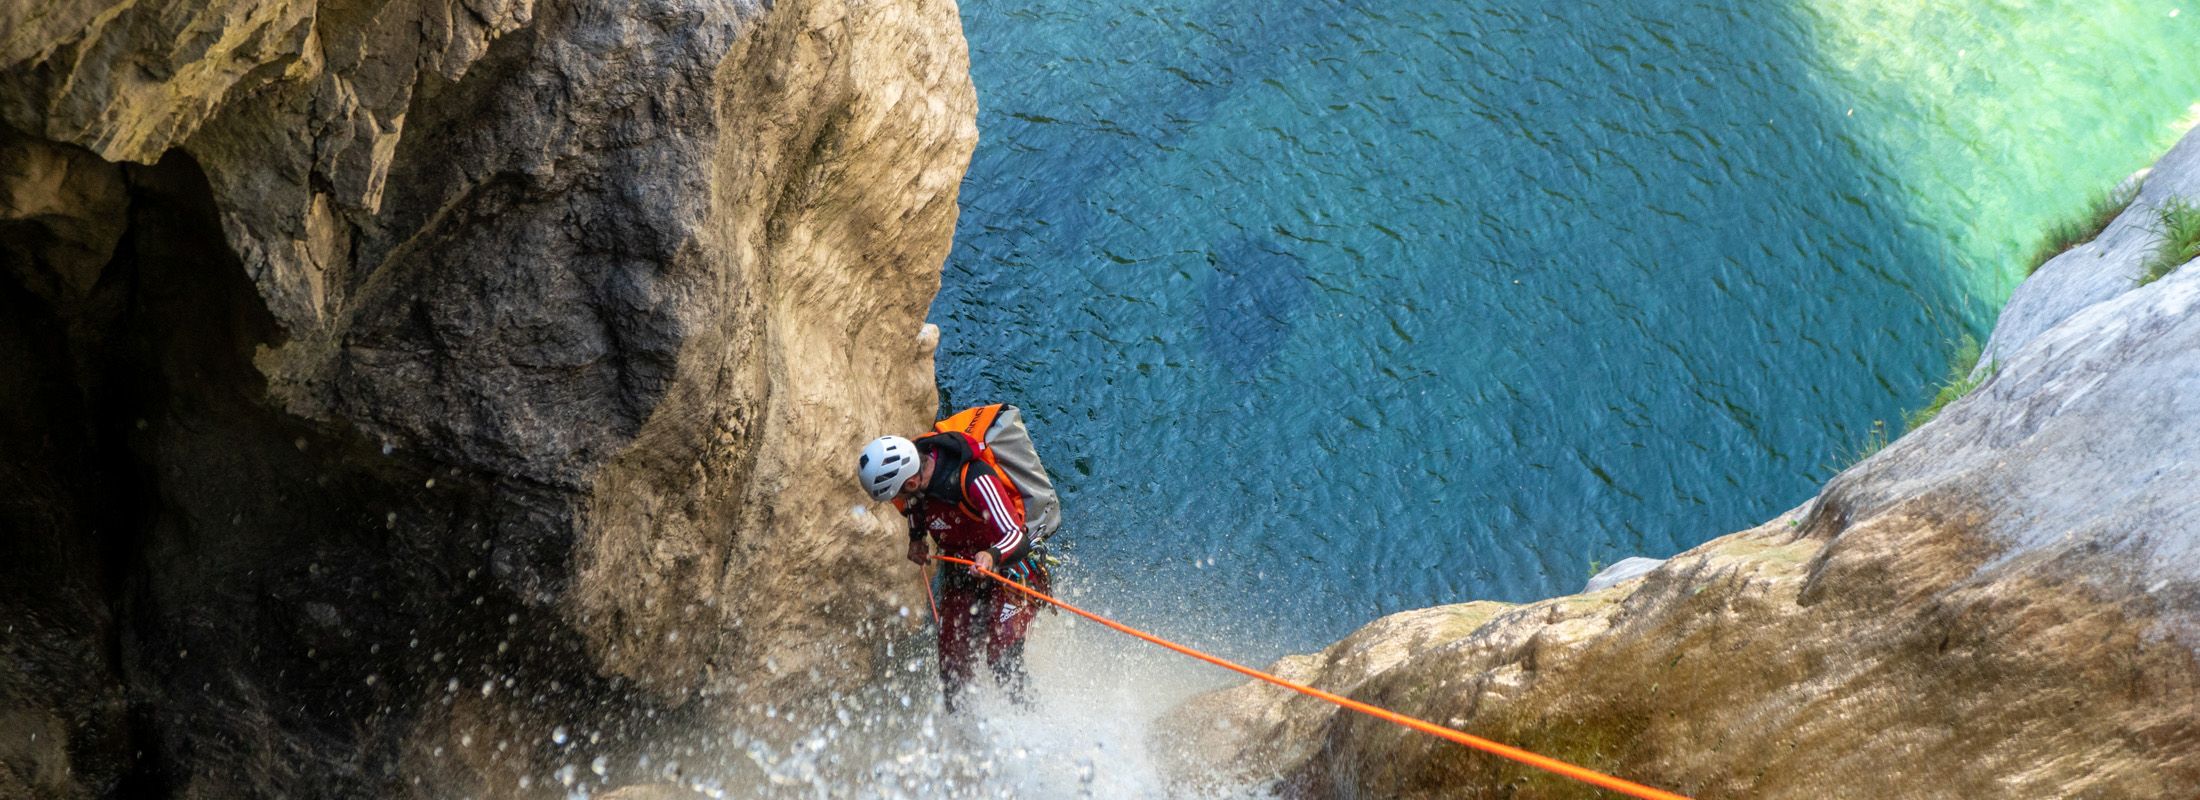 Canyoning in Tessin